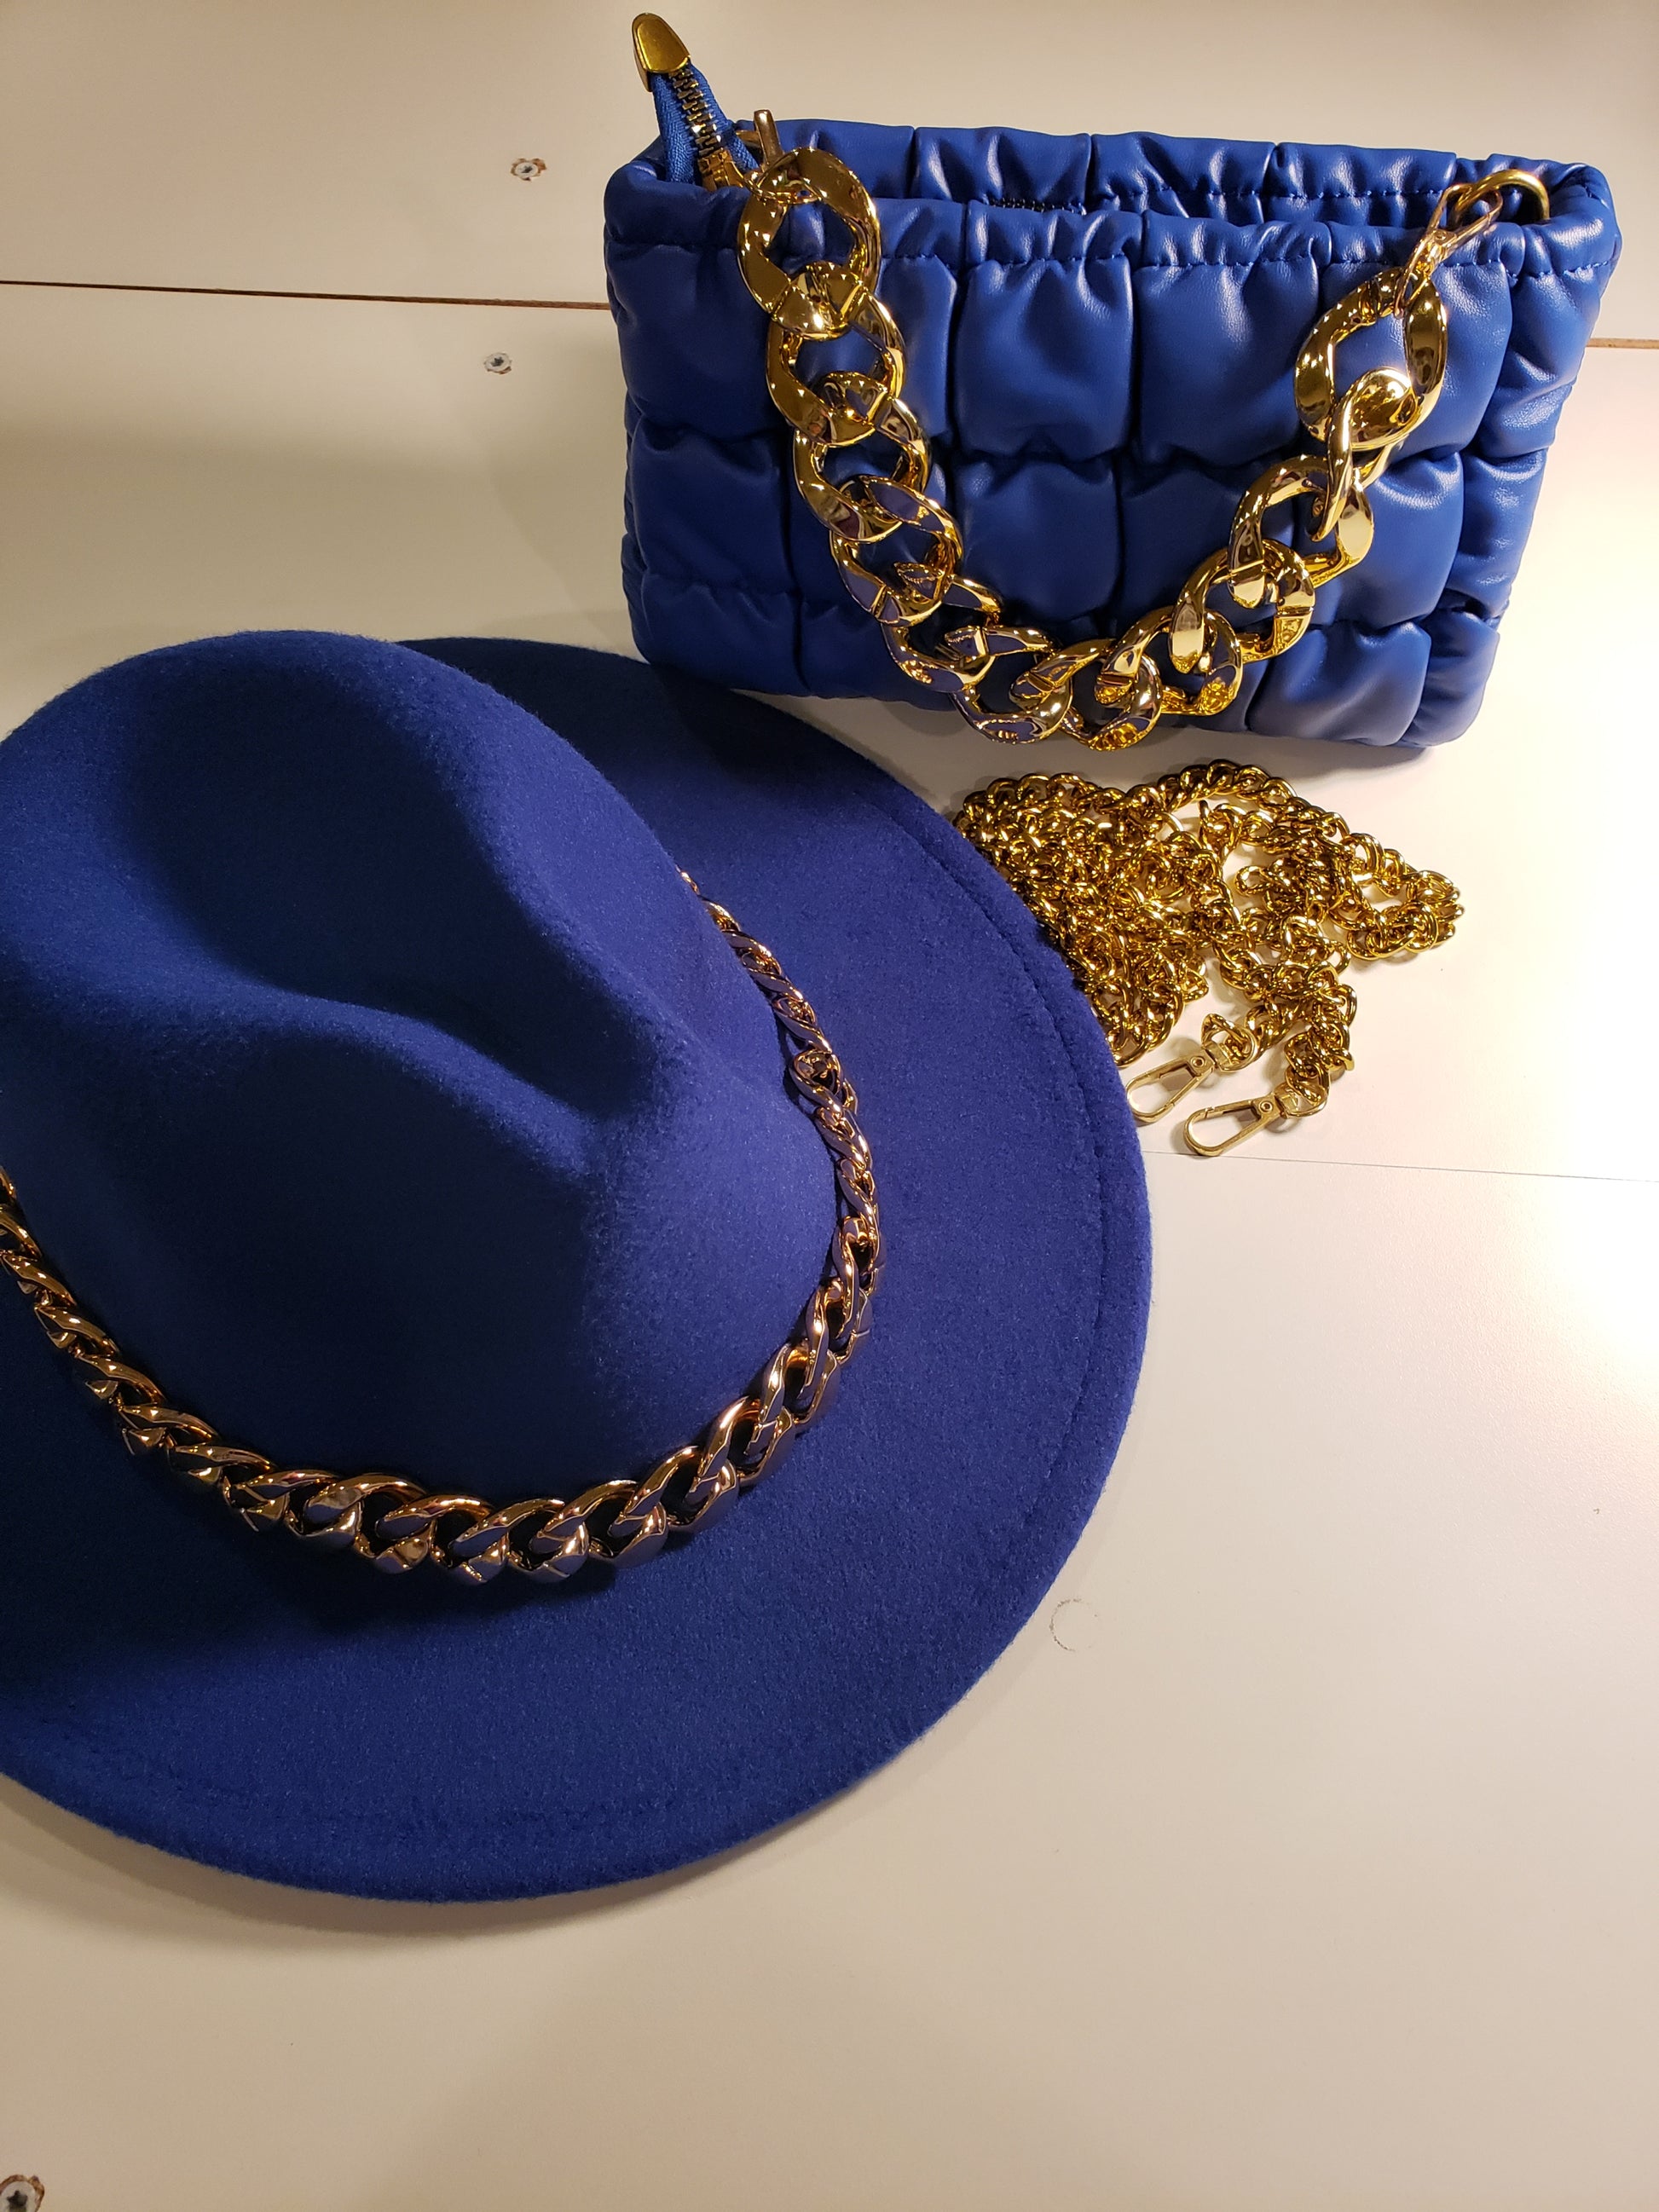 Women Casual Chain Design Solid Color Shoulder Handle Bag And Jazz Hat Set.  1 Full pocket on inside.  Colors may look slightly different due to picture.